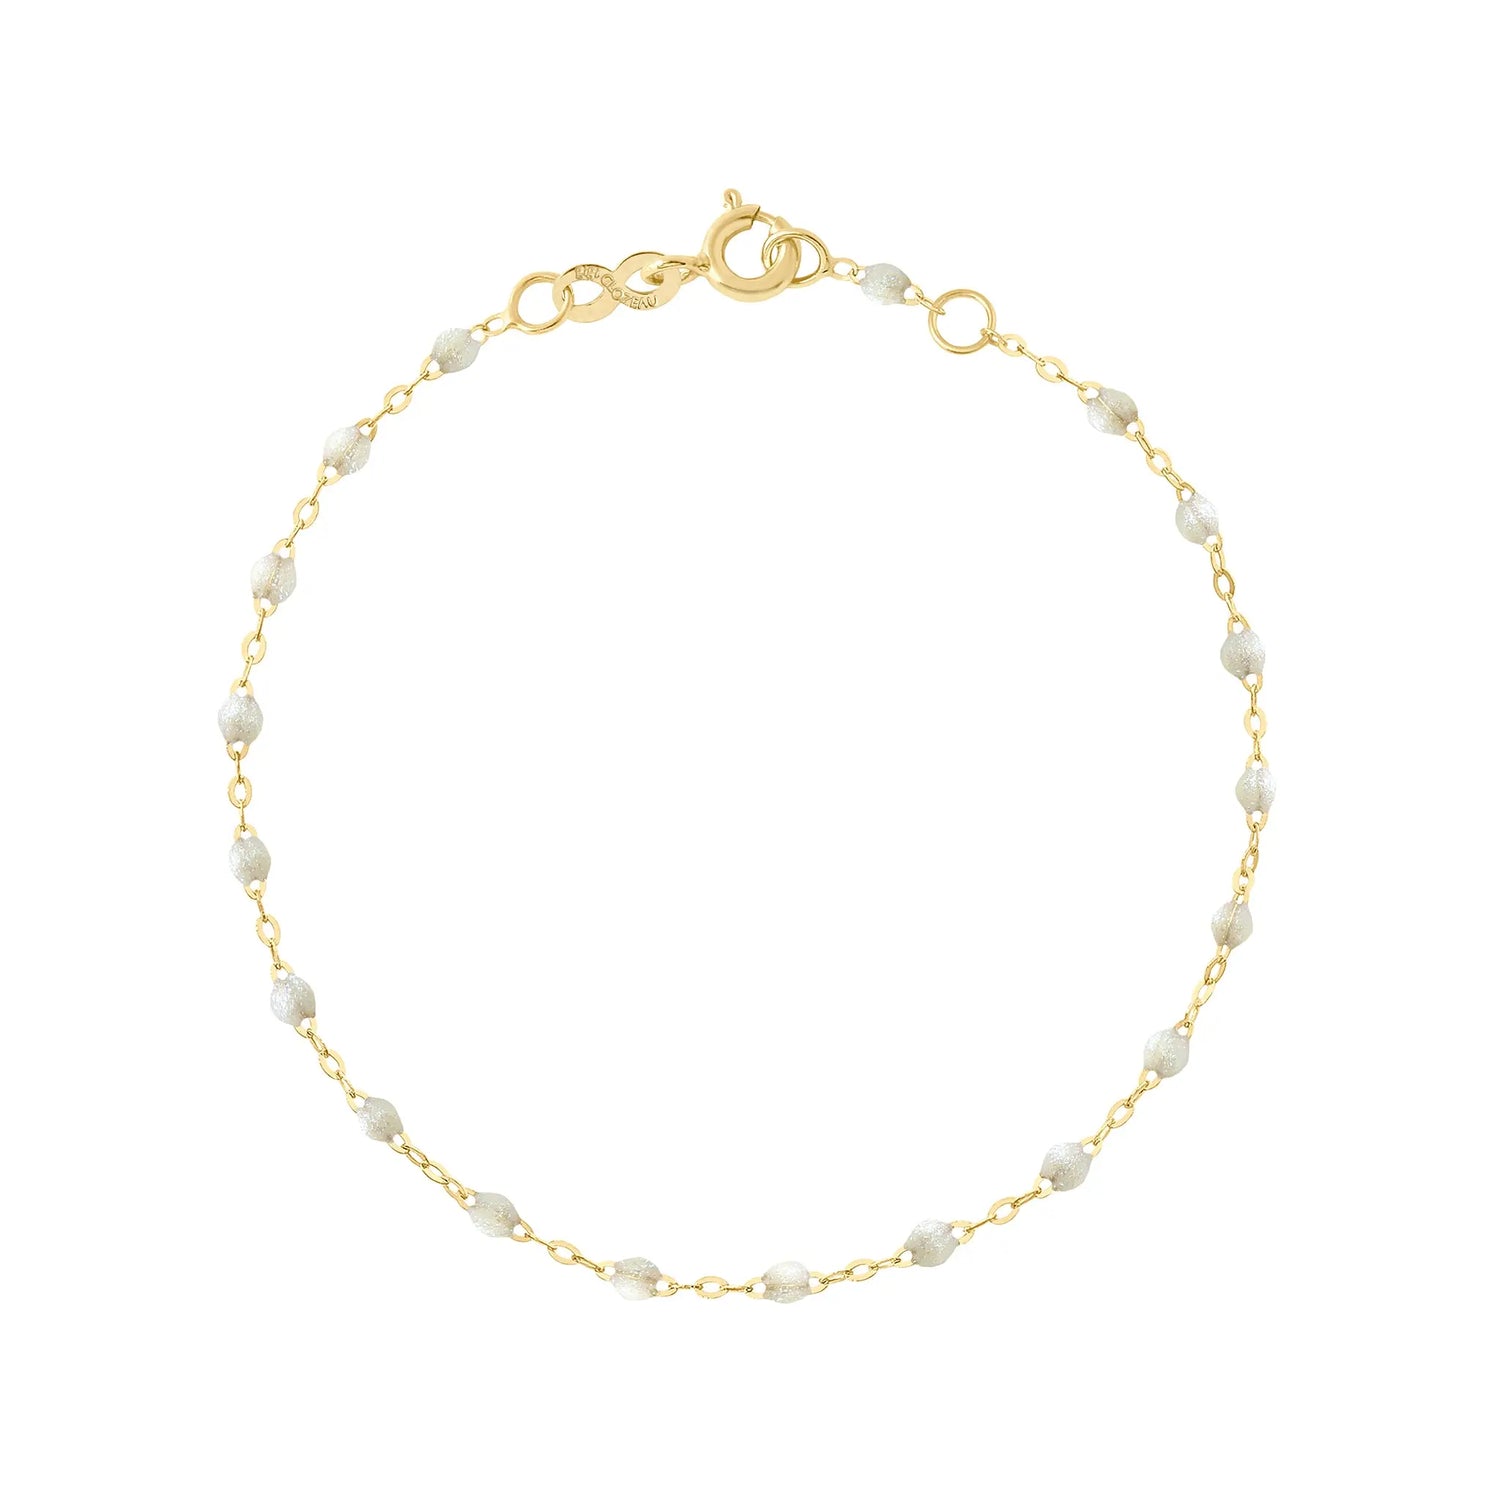 The Classic Gigi bracelet by gigi CLOZEAU features 18K Yellow Gold, and unique Opal jewels for a simple, everyday look.   Each jewel is unique, artisanally made in their family-owned workshop. 18K yellow gold and resin. The bracelet measures 6.7 inches with adjustable clasp at 6.3 inches.